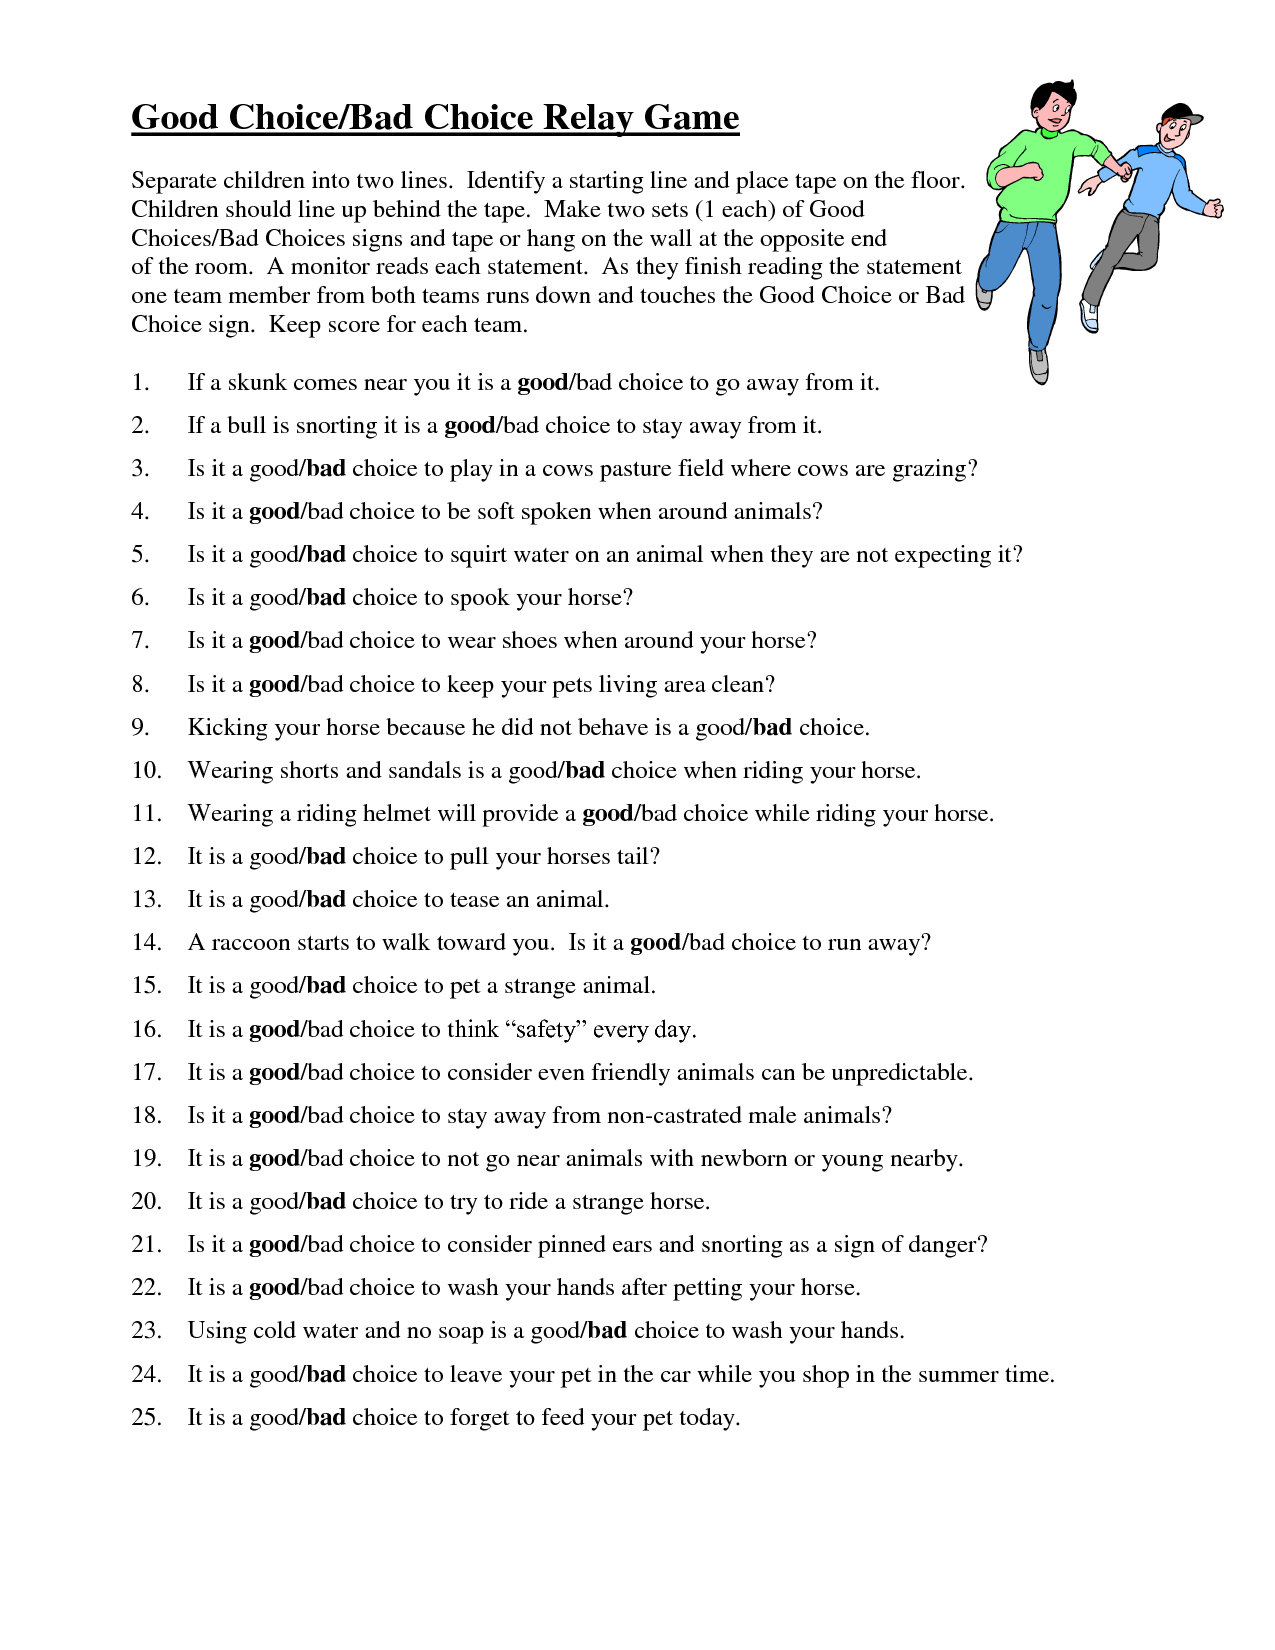 11-best-images-of-good-and-bad-choices-worksheet-making-friends-worksheets-for-kids-making